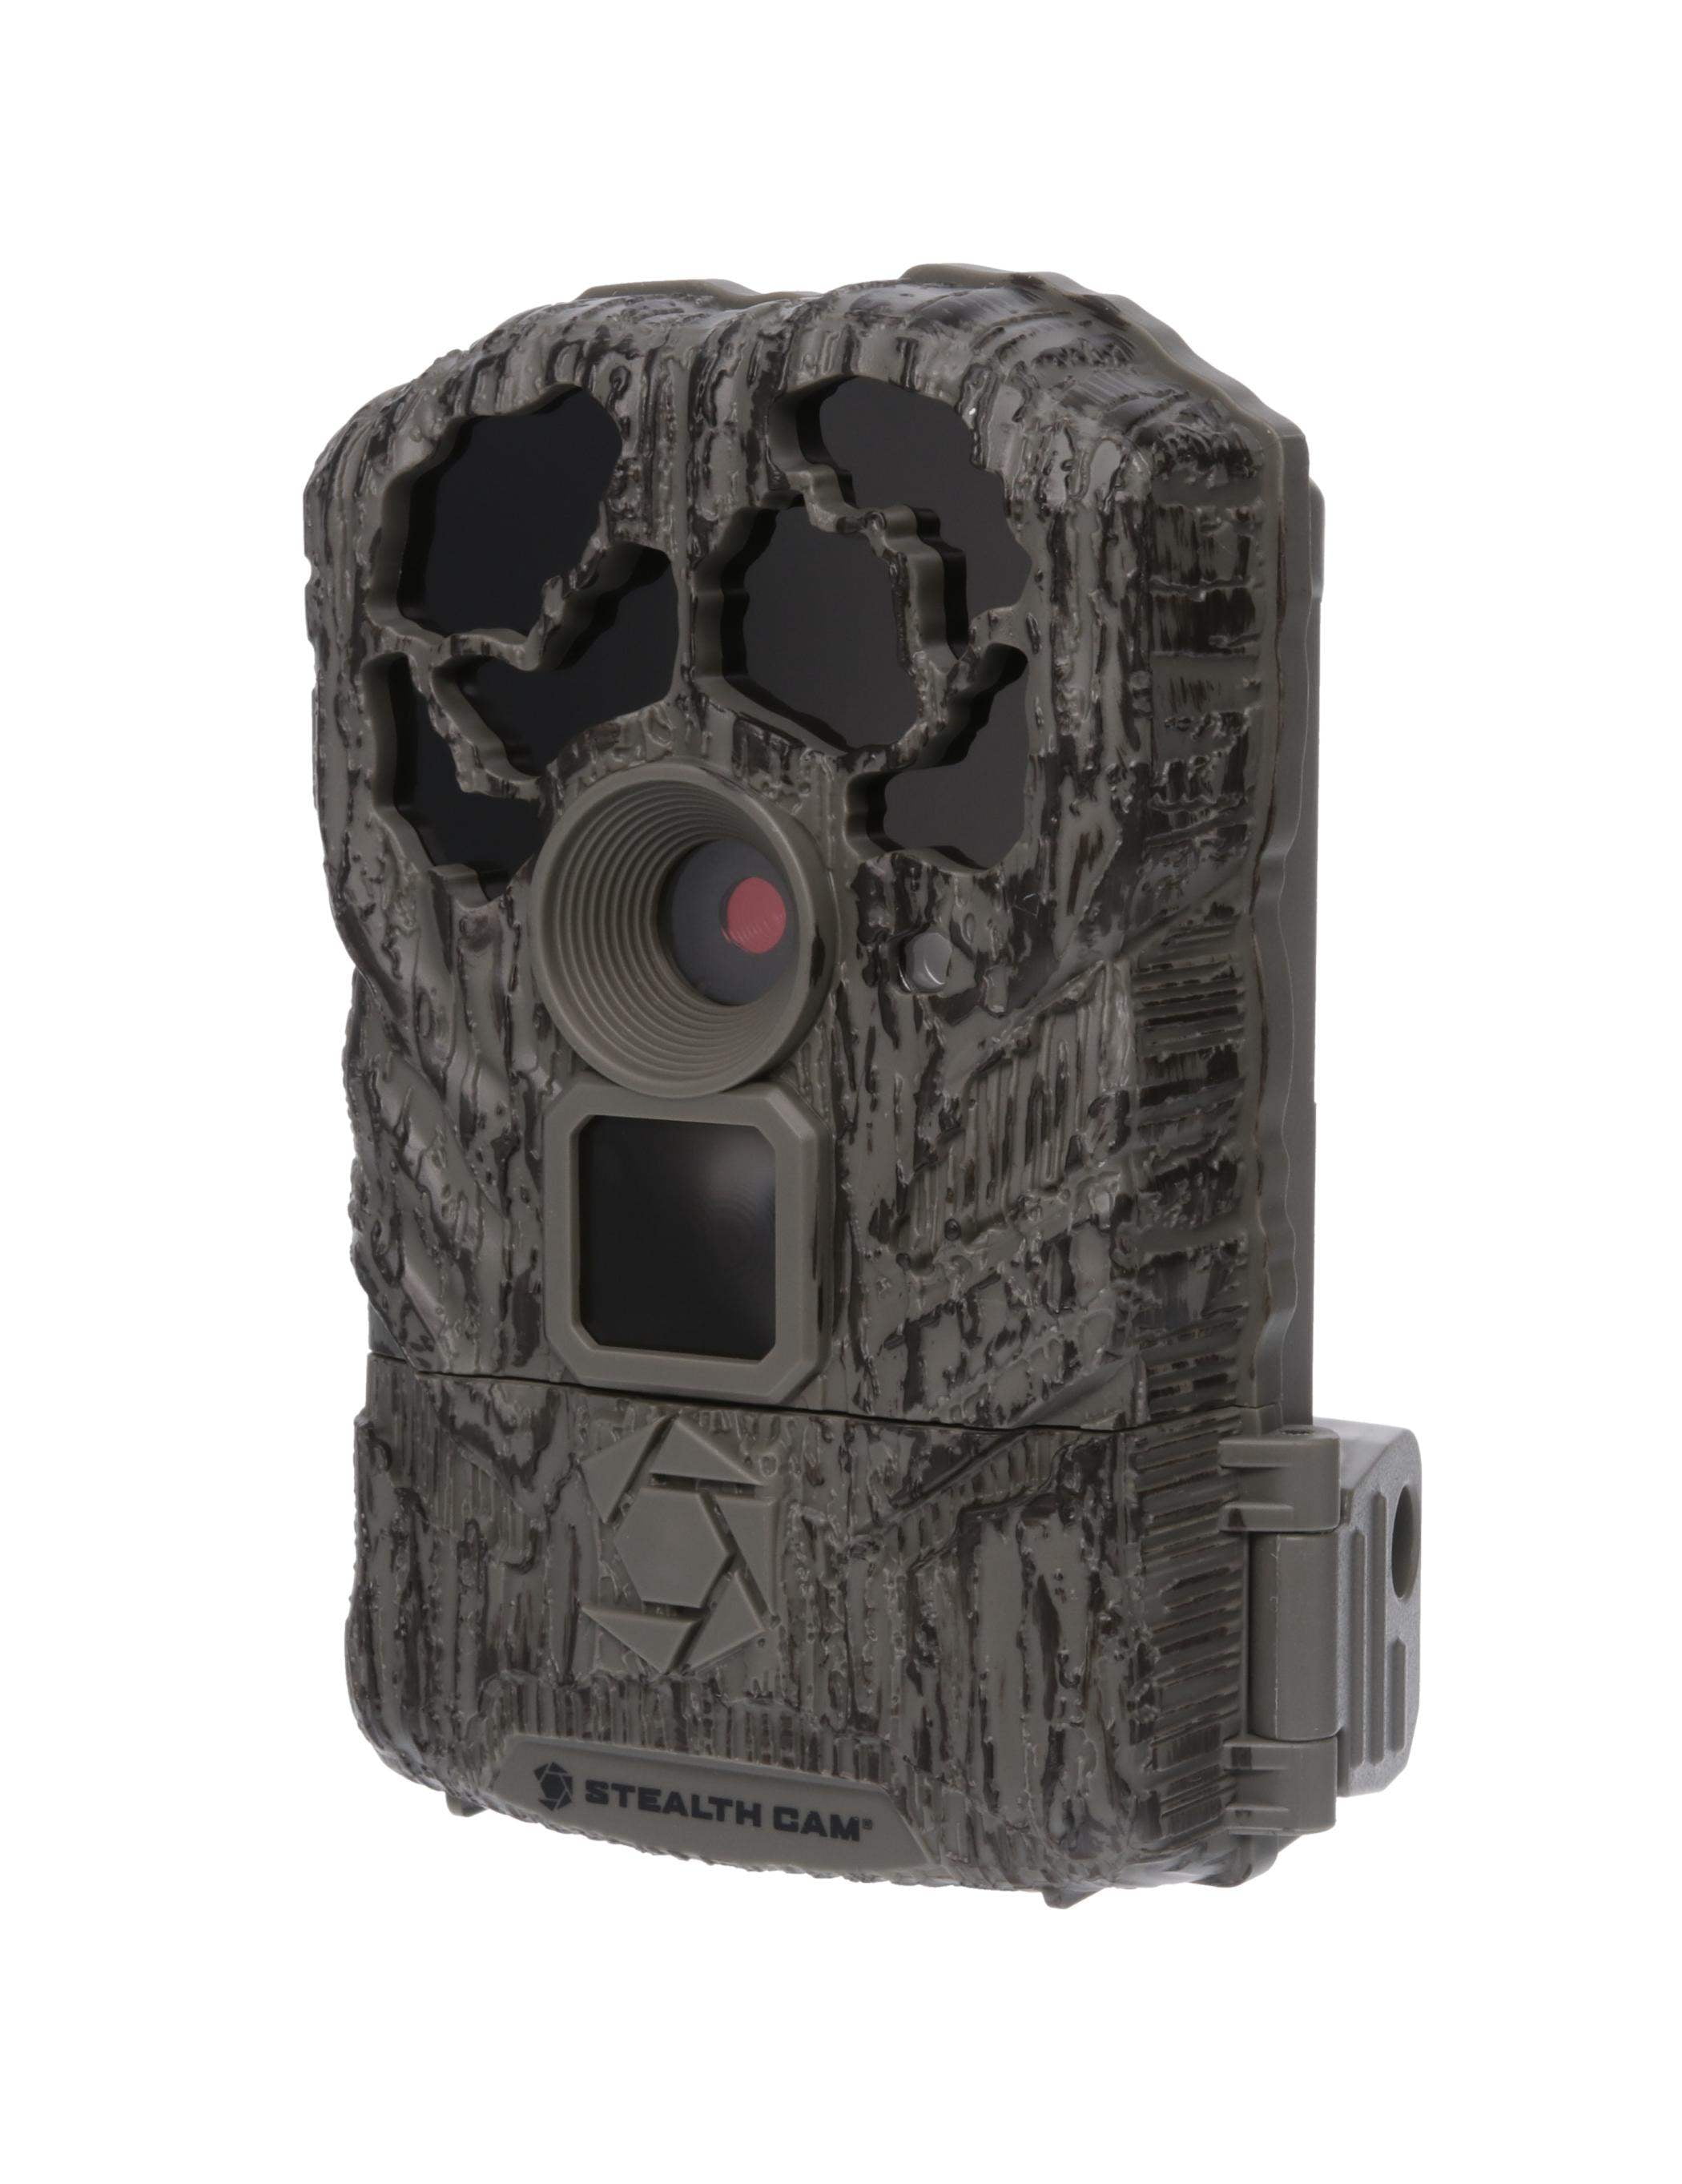 8MP-60 FT RANGE-QUICK SET DIAL STEALTH CAM  PX22  INFRARED SCOUTING CAMERA 